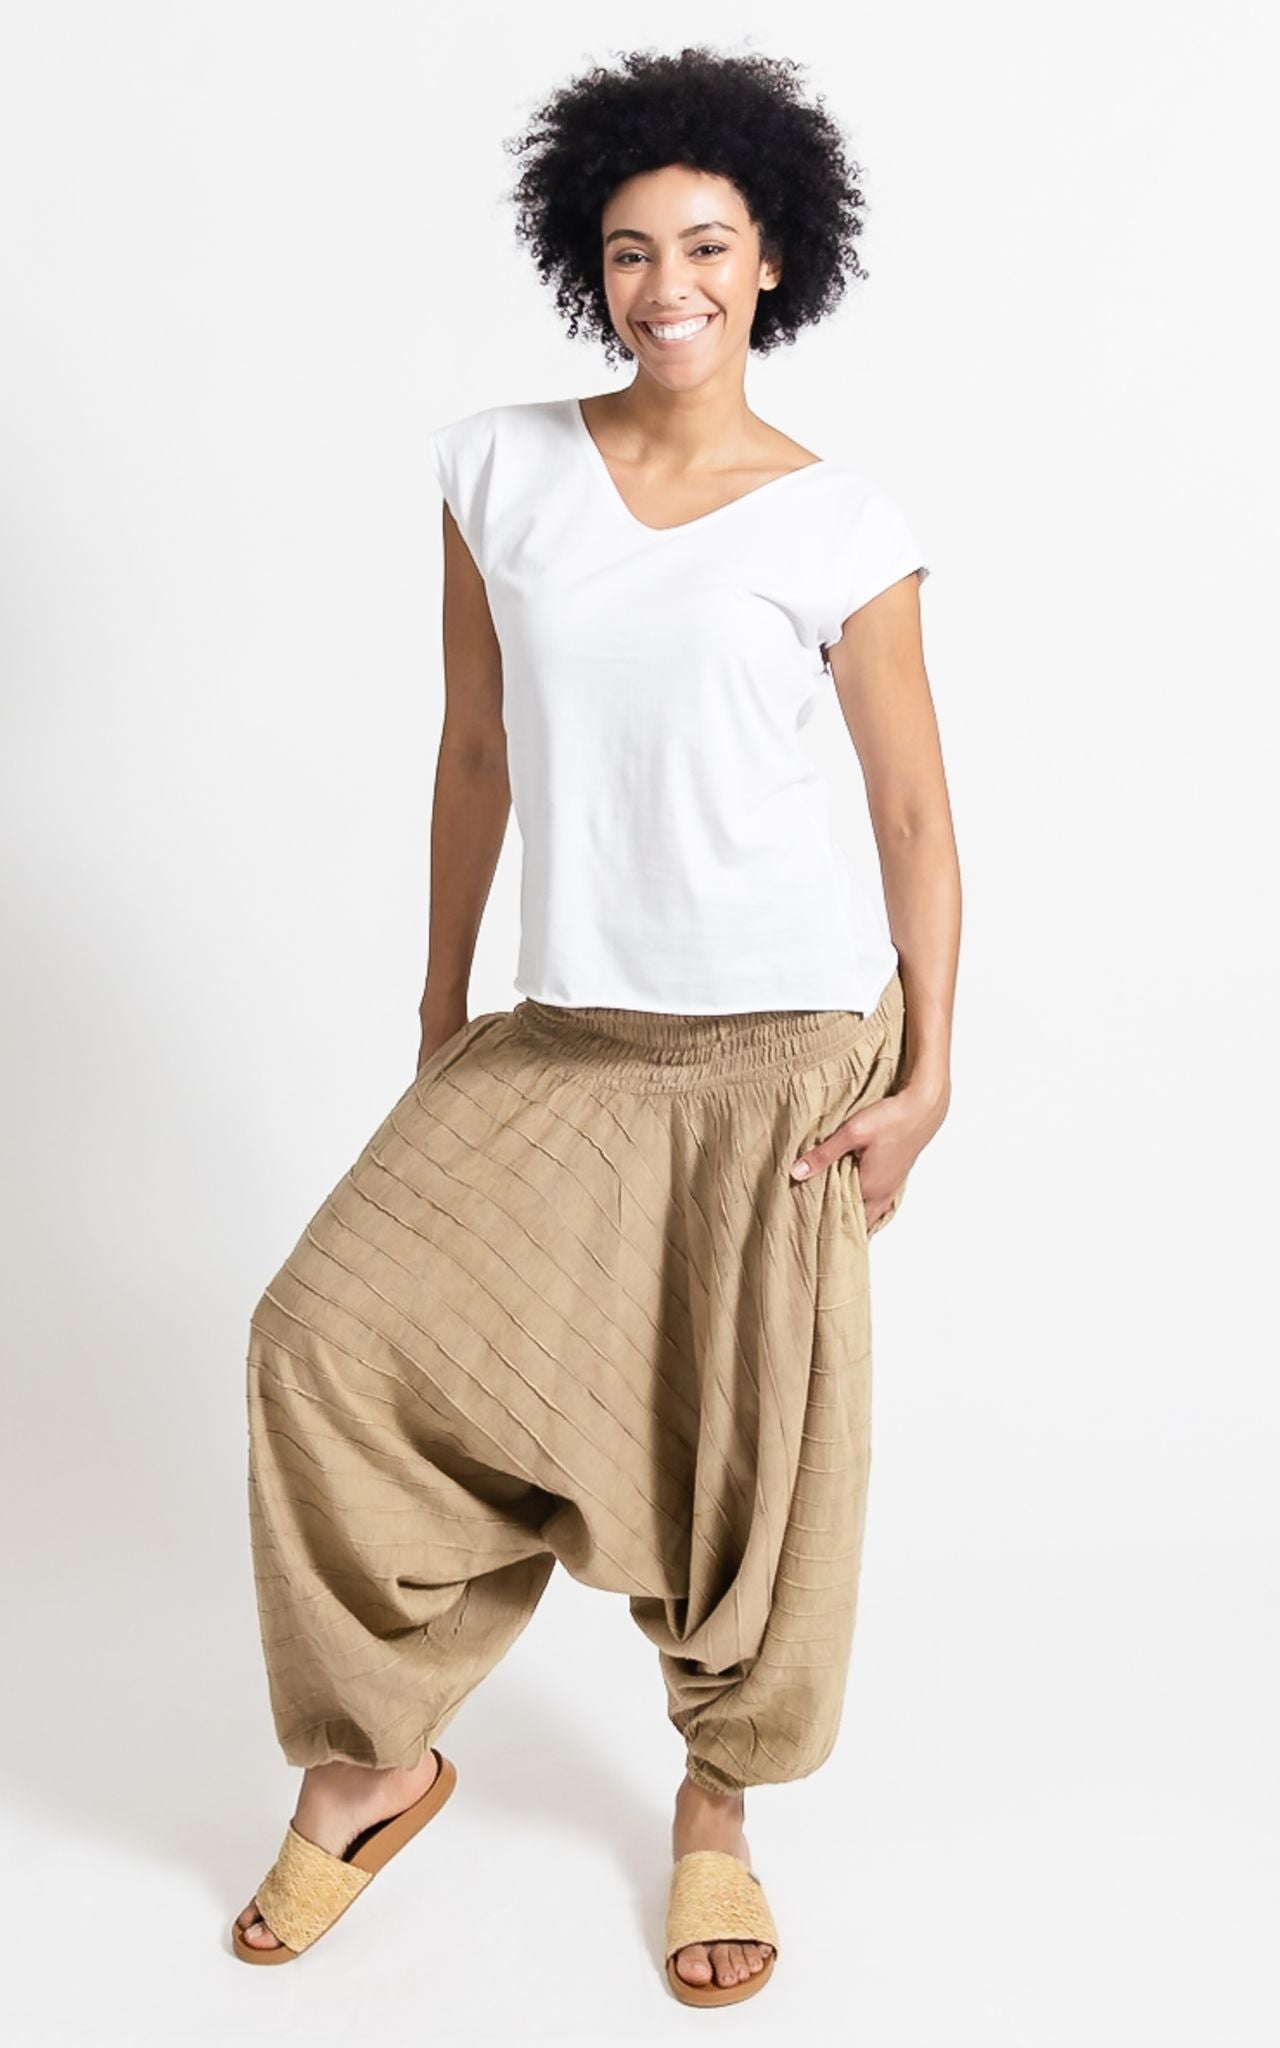 Surya Australia Ethical Cotton Low Crotch Harem Style Pants made in Nepal - Natural